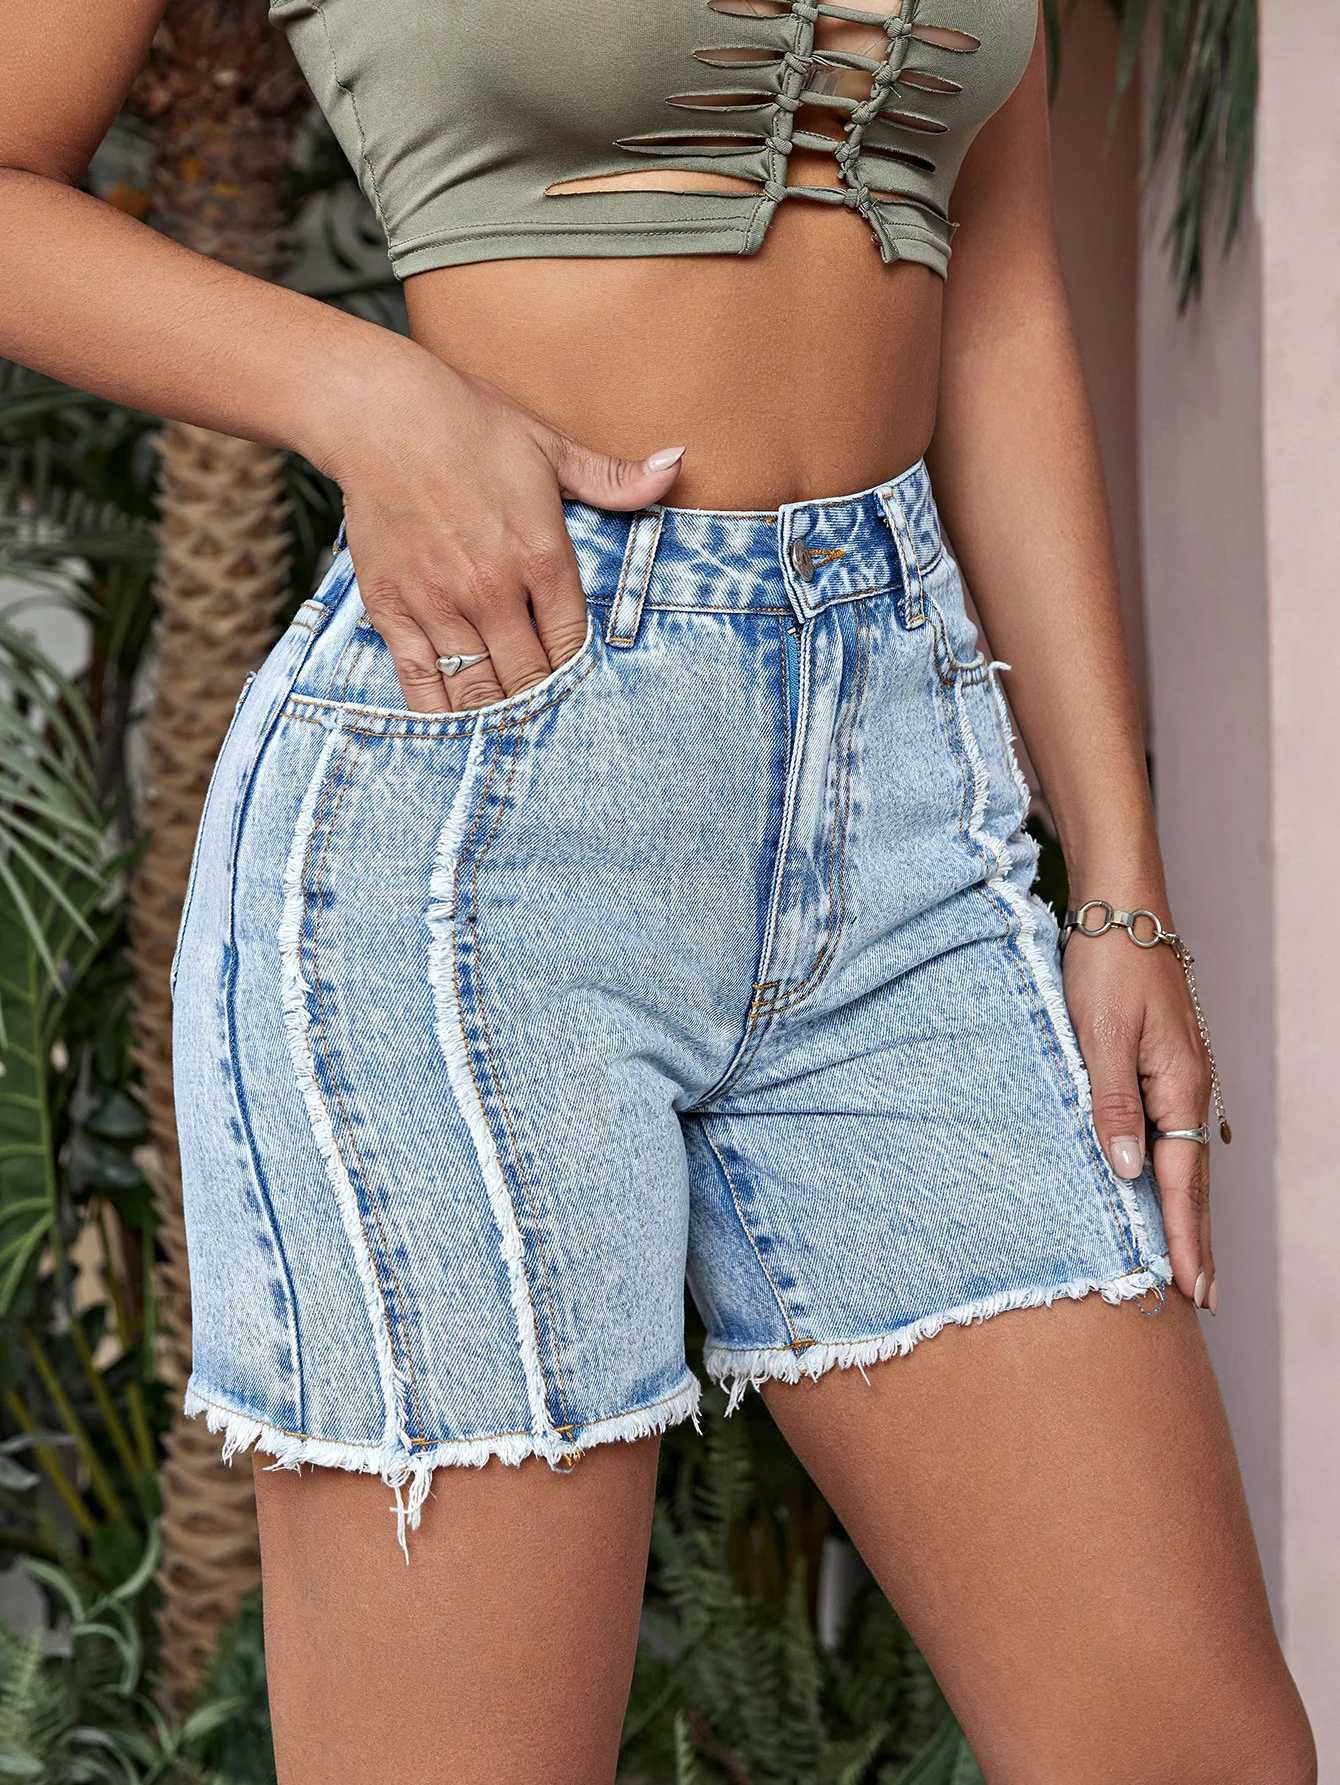 Women's Shorts Autumn New Women Fashion Casual Ripped Cotton Denim Shorts Jeans Booty Shorts Y240425